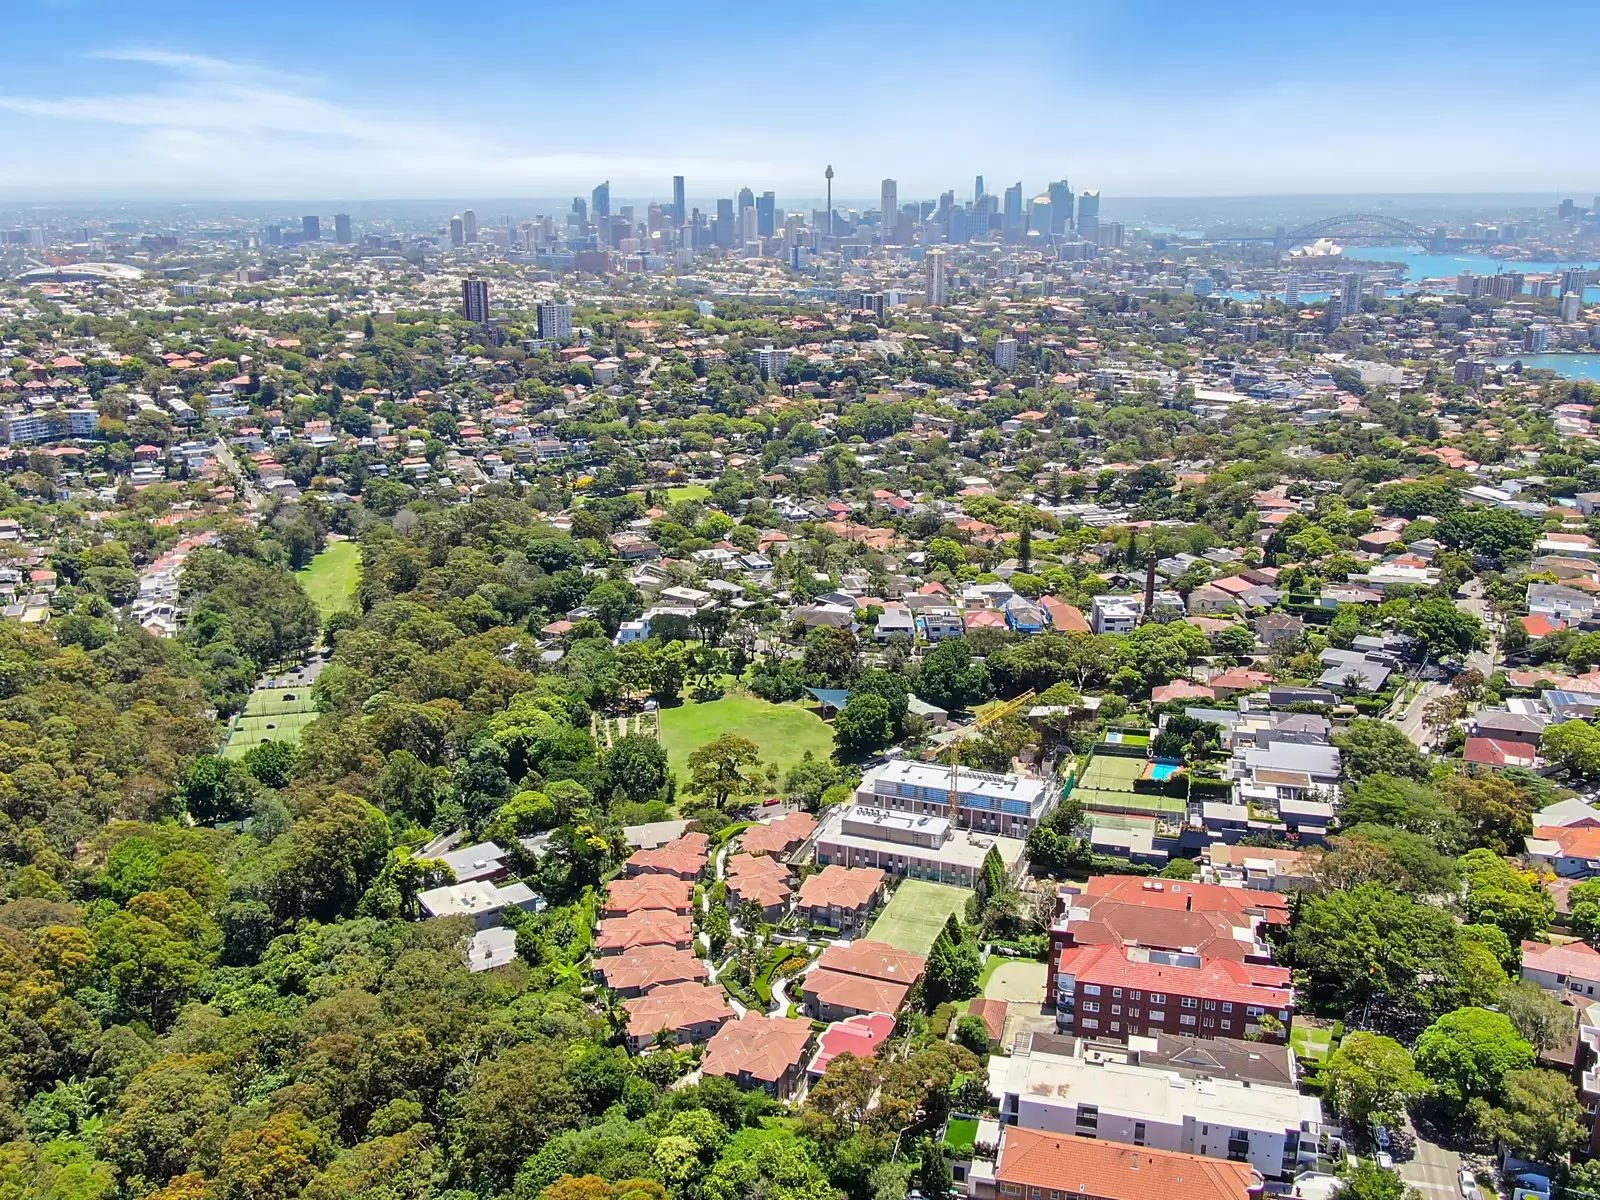 Photo #18: 22/17a Cooper Park Road, Bellevue Hill - Sold by Sydney Sotheby's International Realty